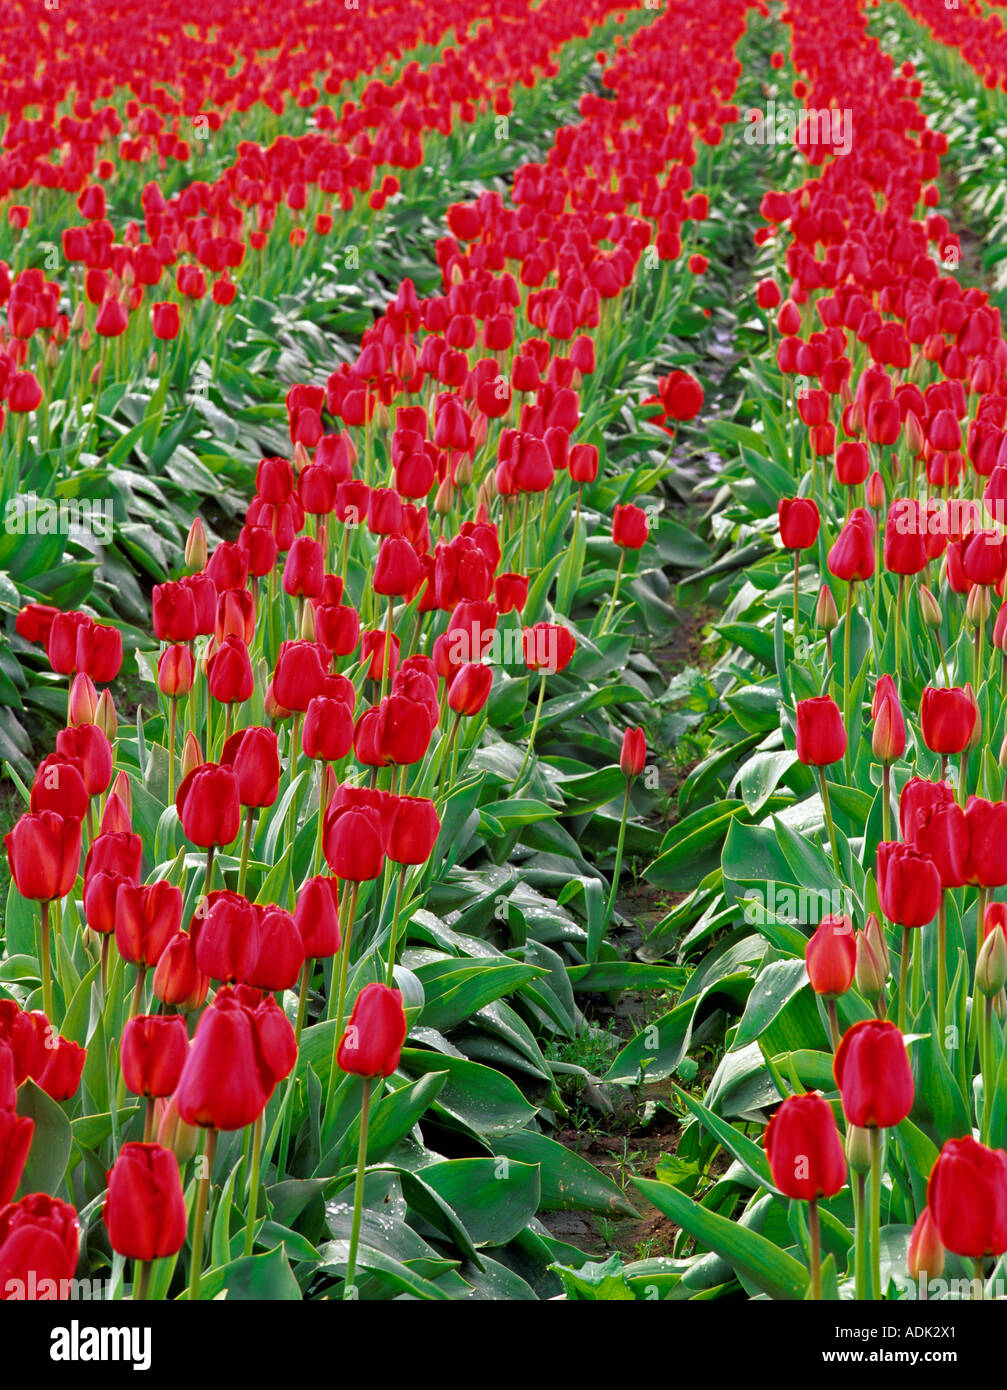 Red tulips variety Apeldoorn Wooden Shoe Bulb Company Oregon Stock Photo